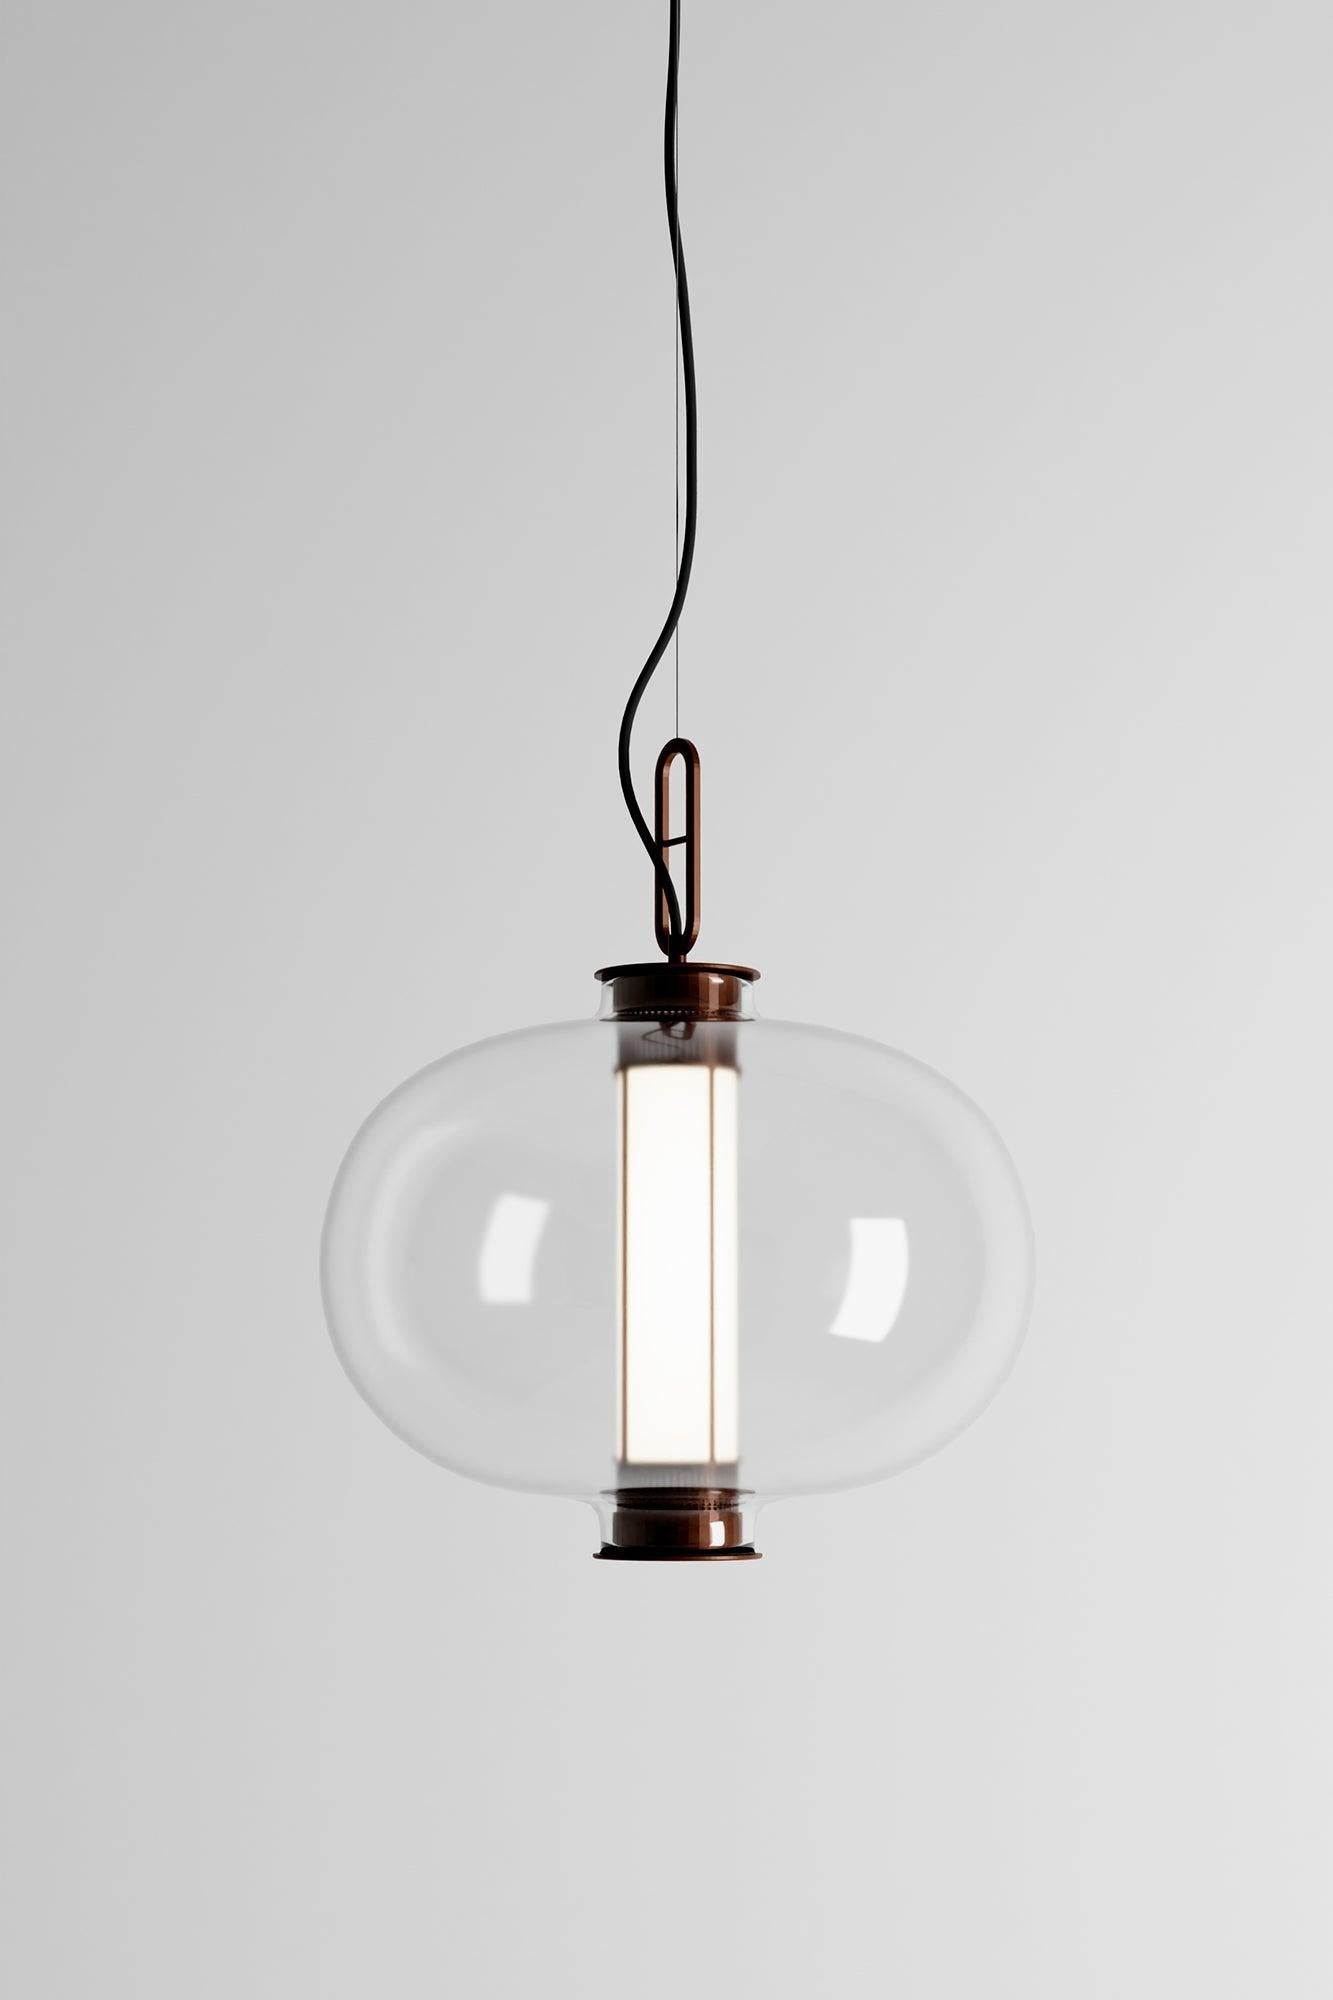 BAI T MA MA - Outdoor

Suspension lamp, model BAI T MA MA Outdoor, designed by Neri & Hu in 2014. 
Manufactured by Parachilna. 

This collection is inspired by traditional Chinese lanterns. This version however, is a sophisticated one. Made of an